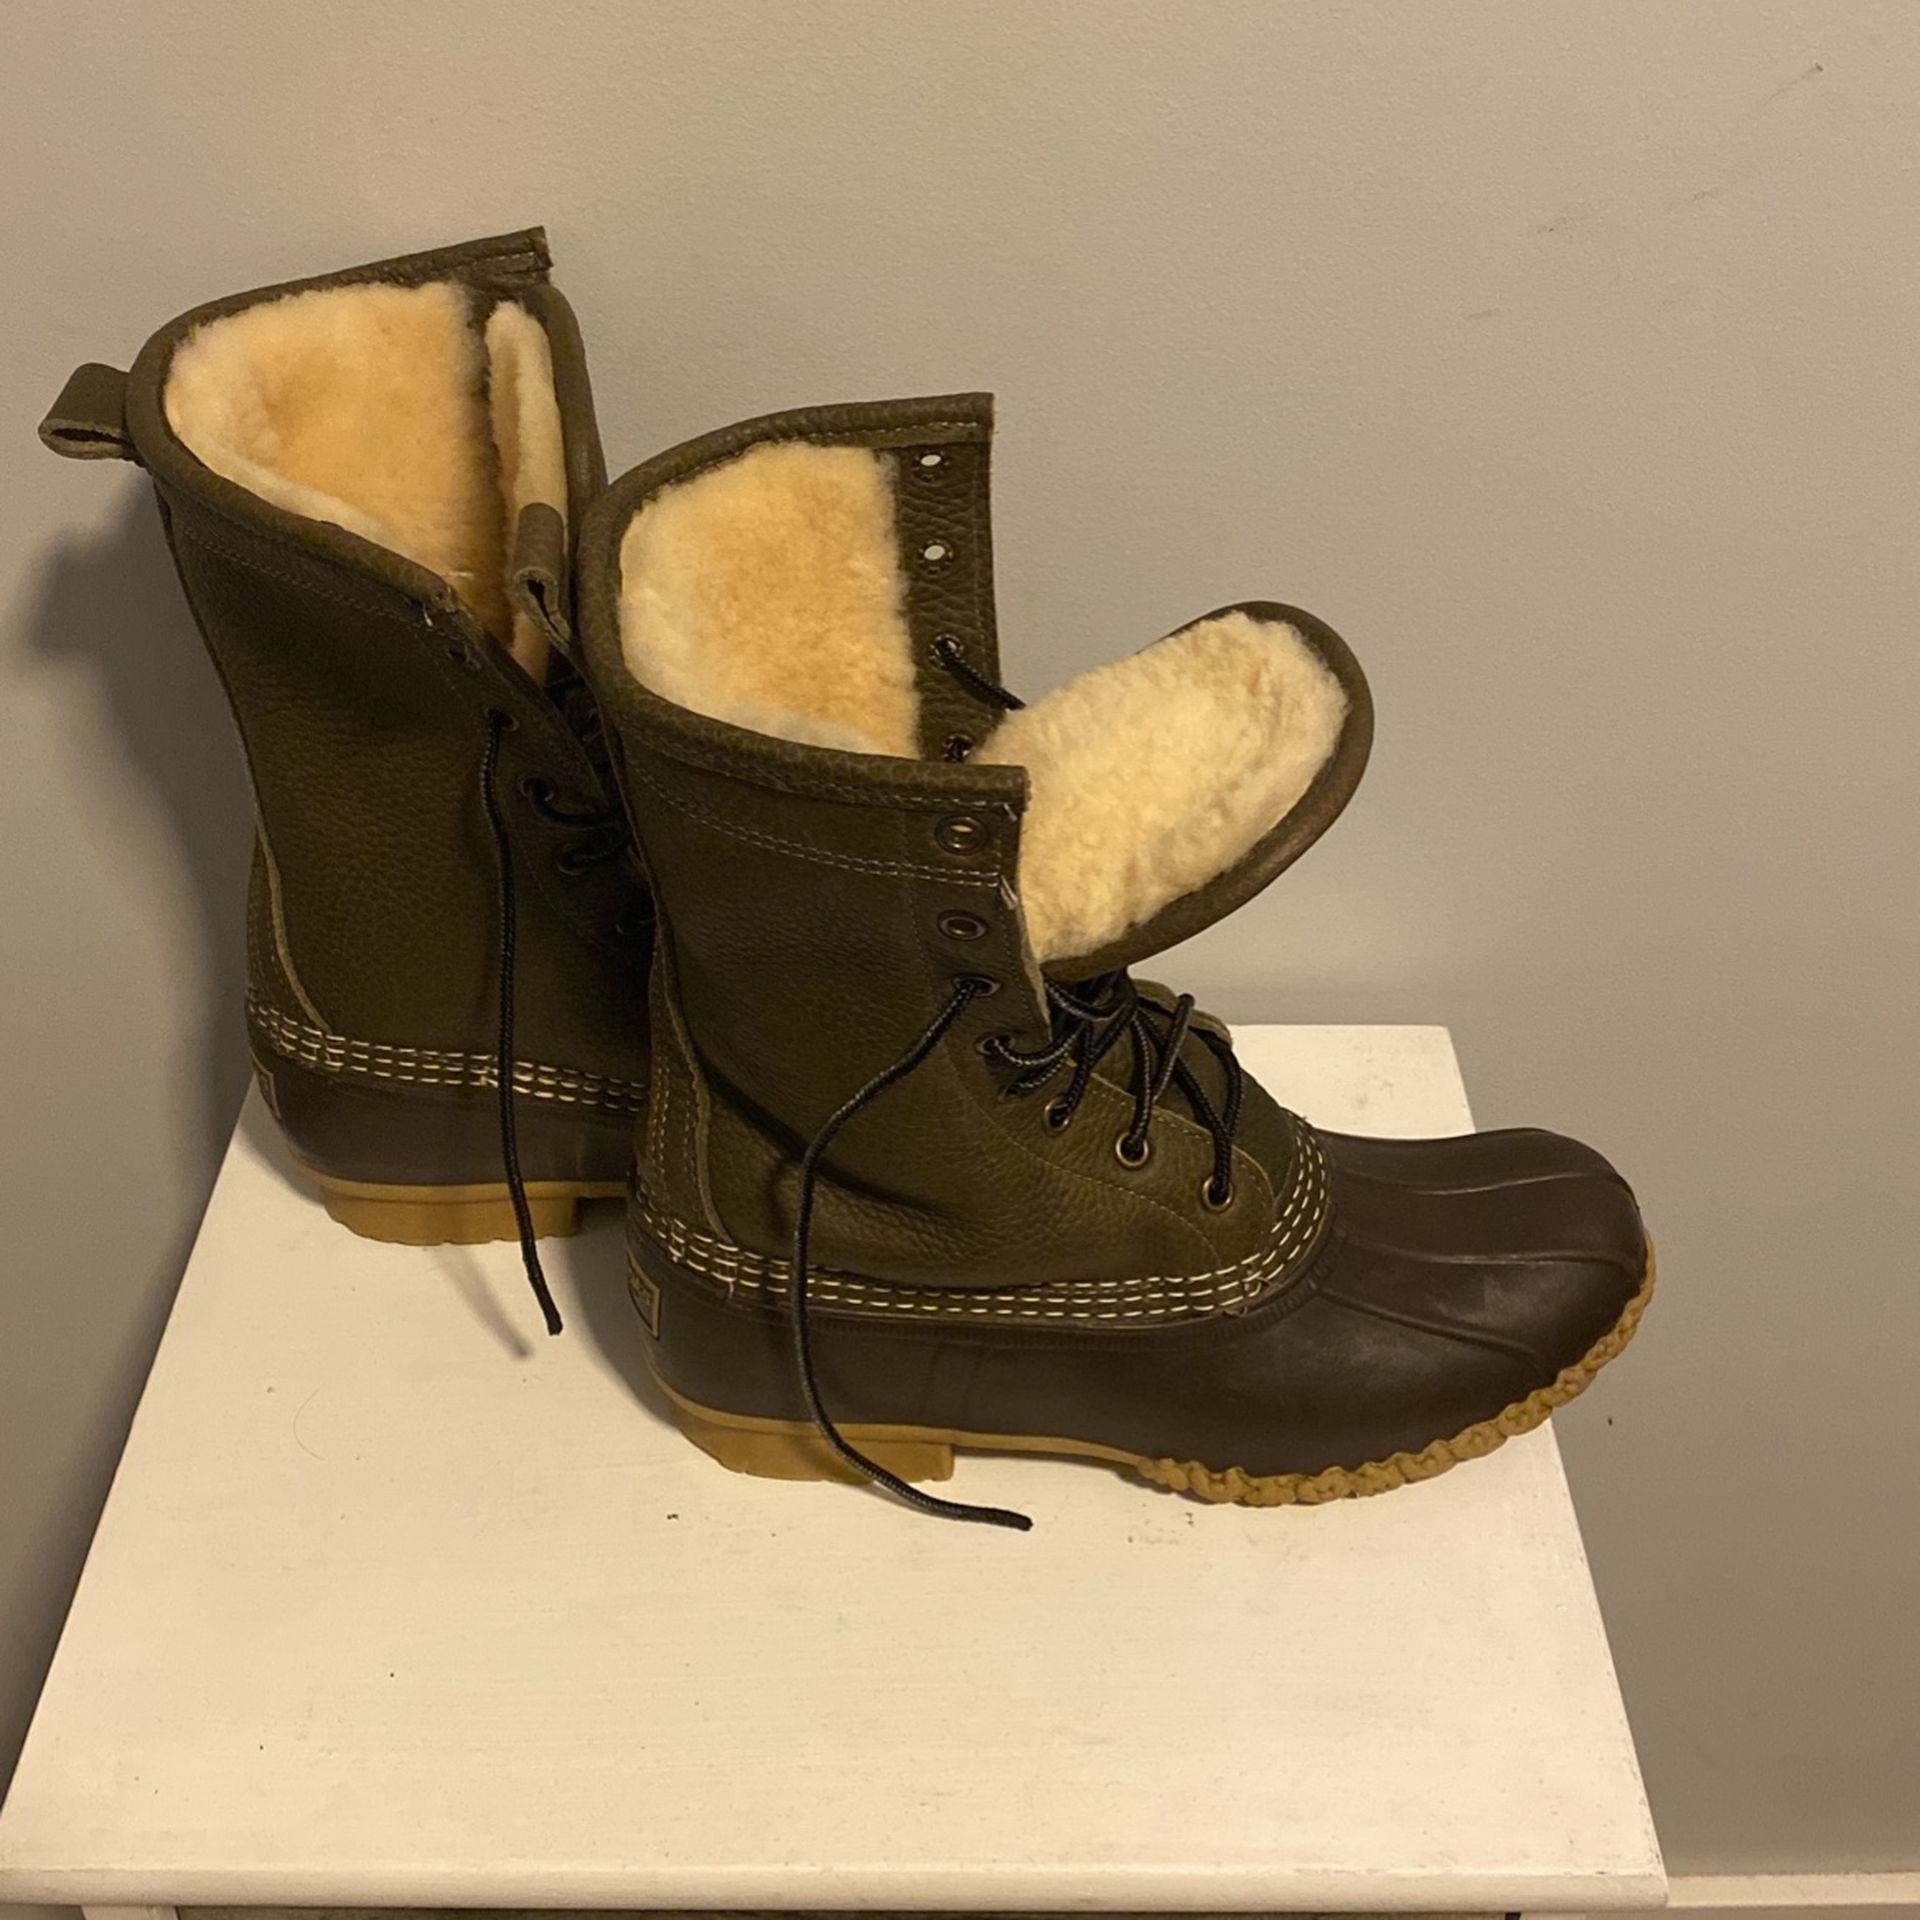 Brand New Women’s Size 7 Shearling Lined Insulated Boots